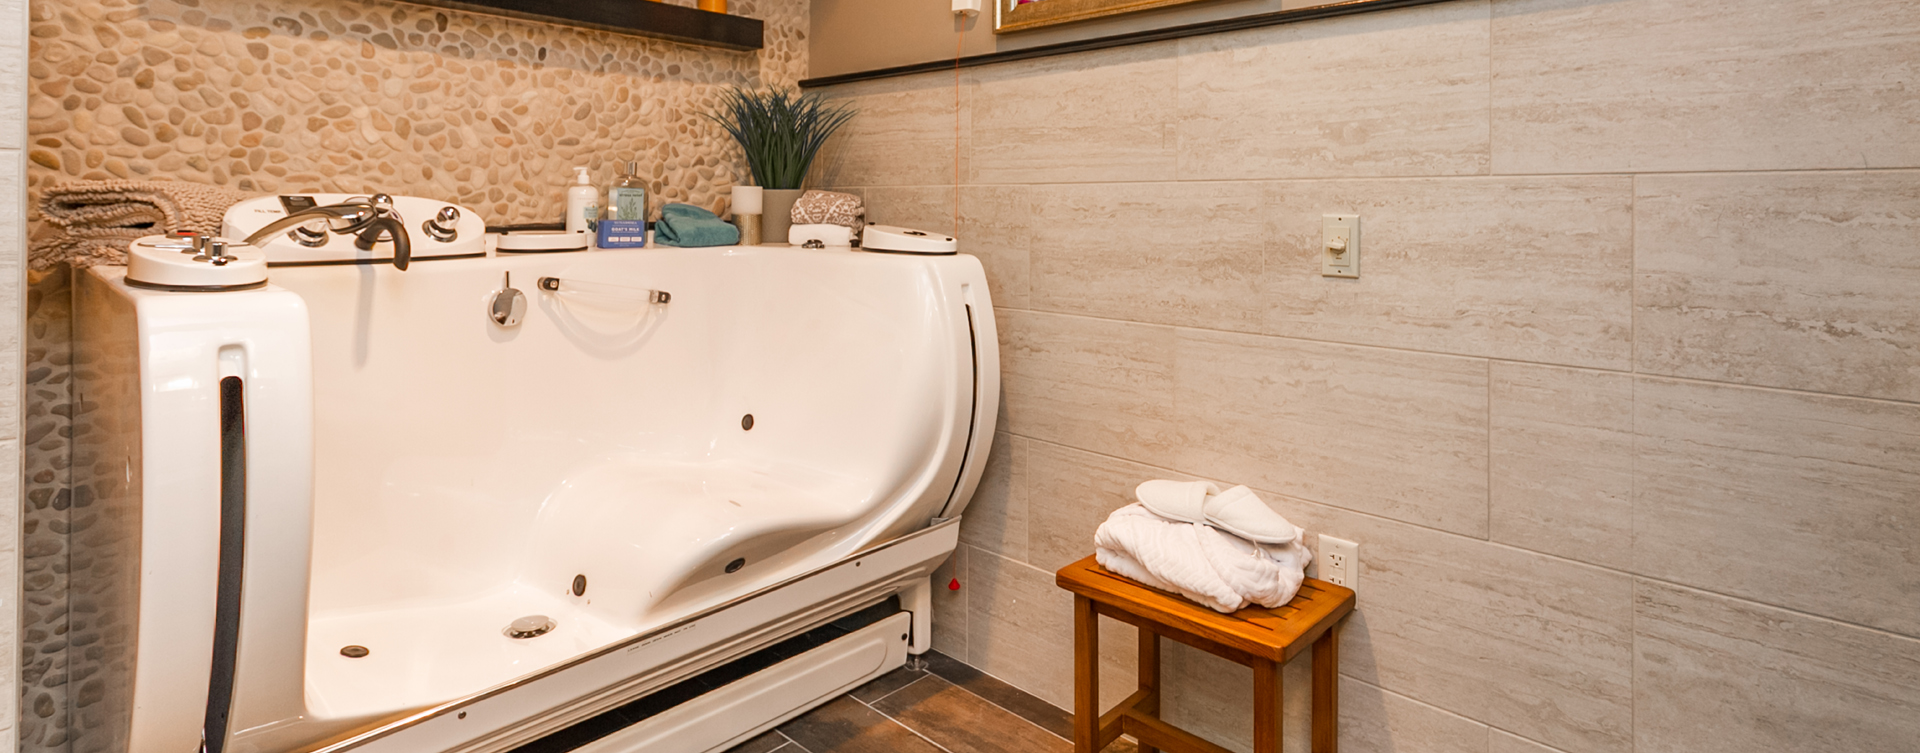 Our whirlpool bathtub creates a spa-like environment tailored to enhance your relaxation and enjoyment at Bickford of Virginia Beach